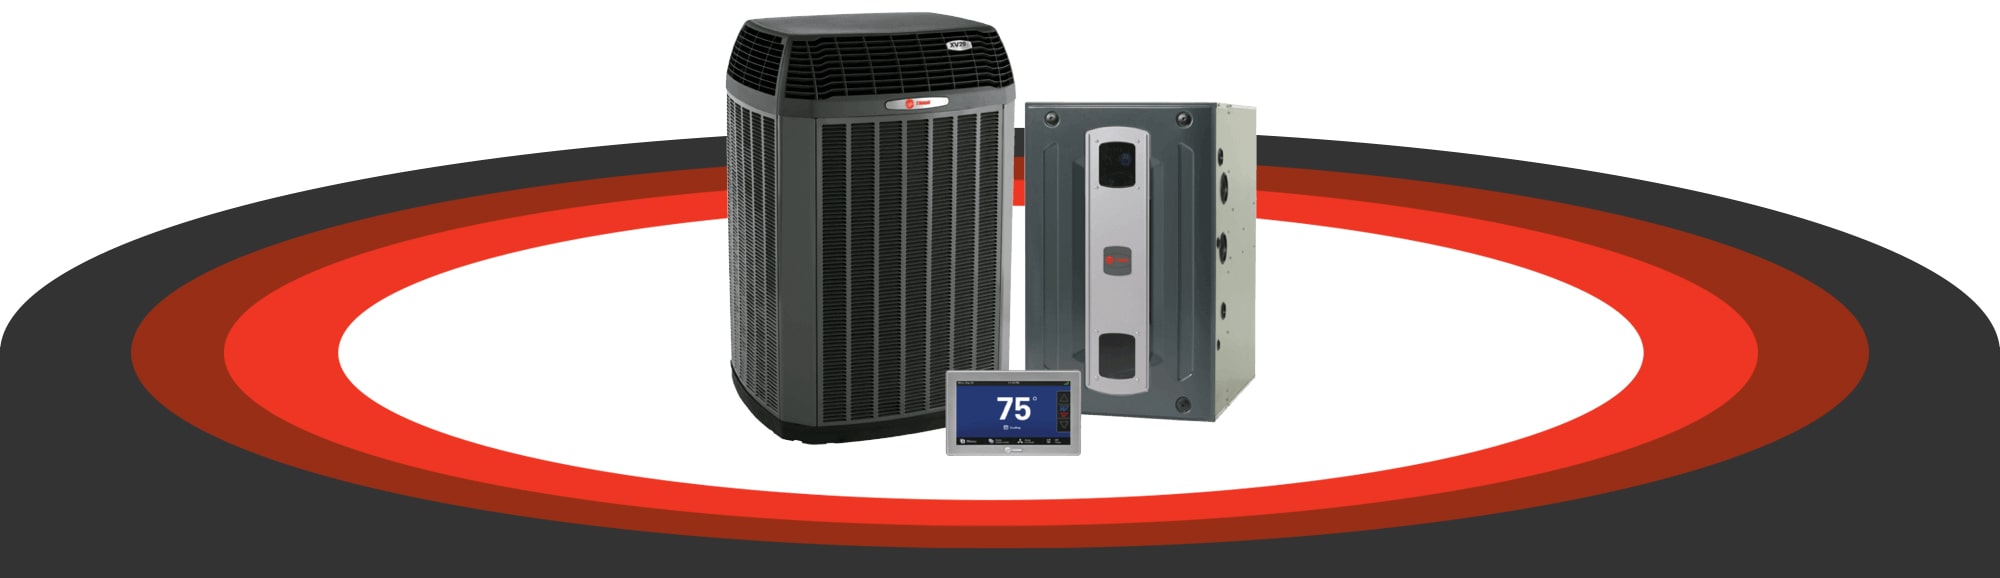 Live in Centennial CO? Get your Trane AC units serviced  by 5280 Heating & Air Conditioning